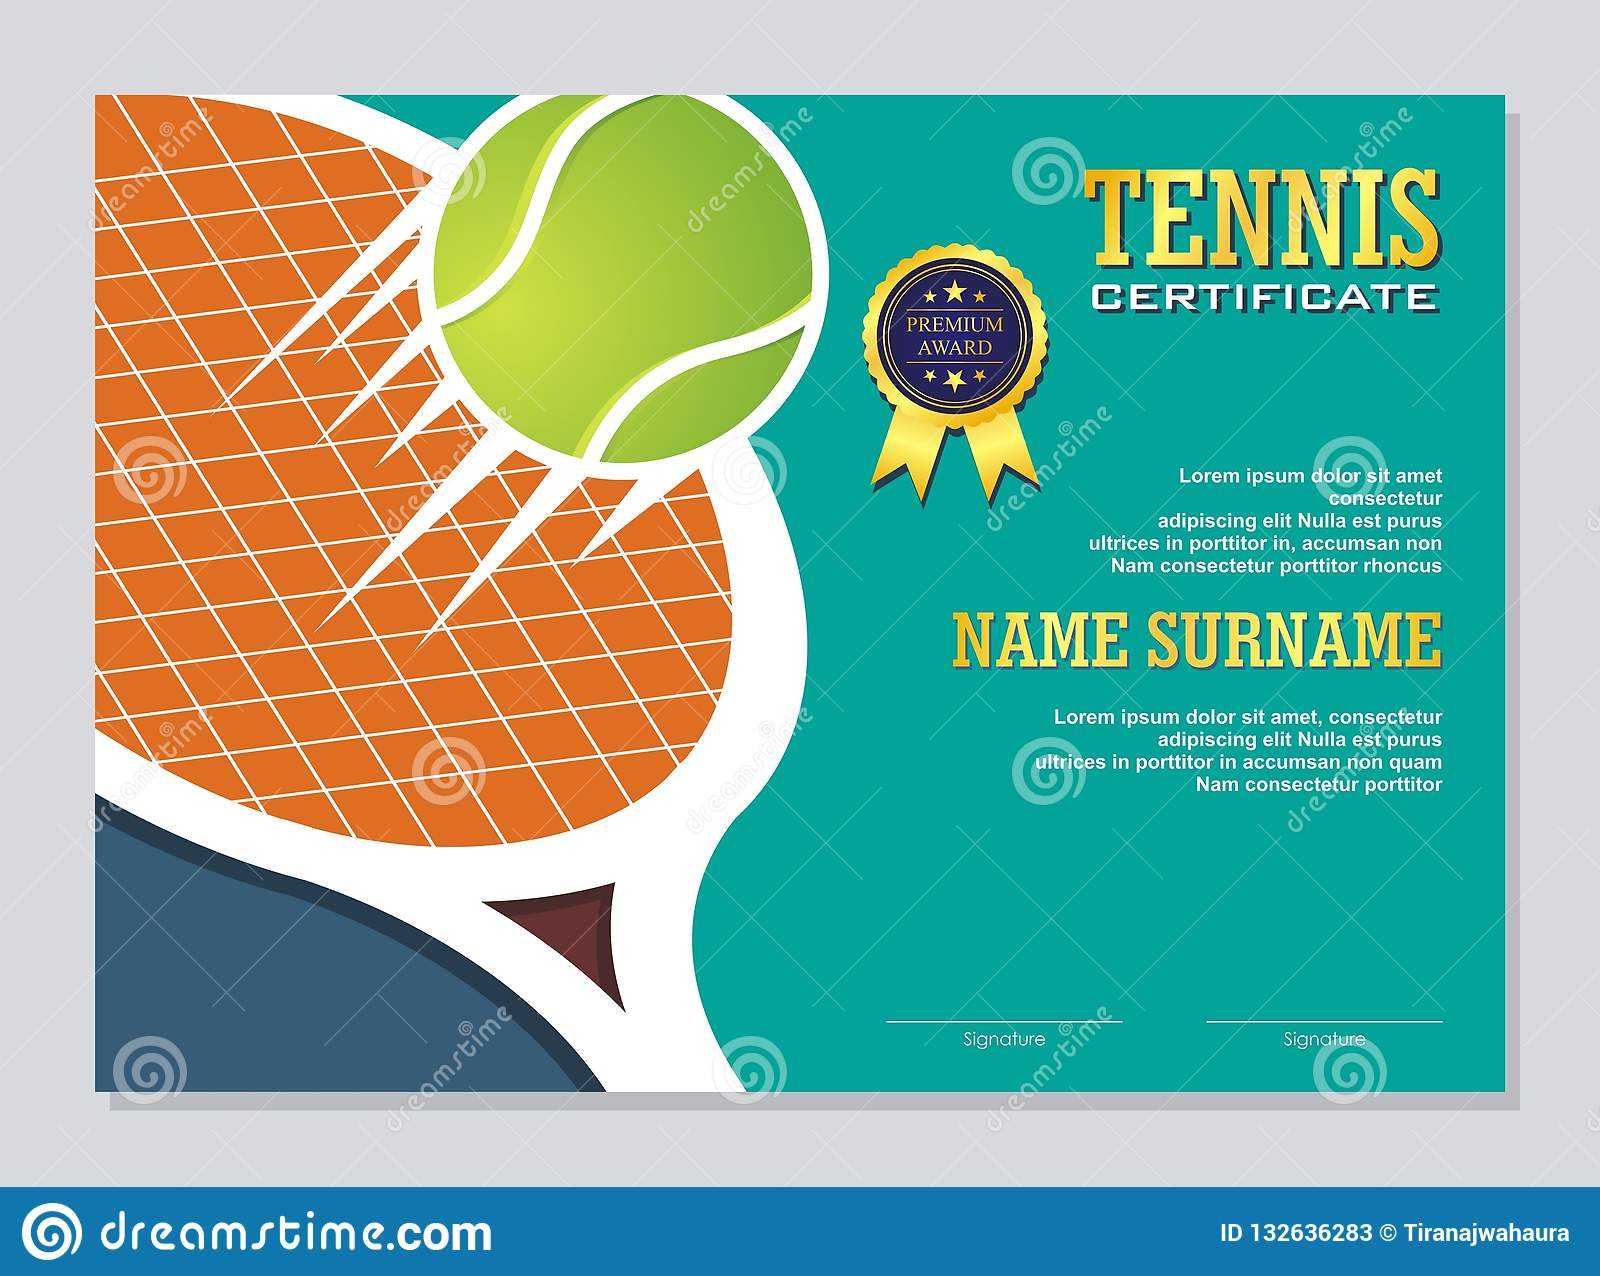 Tennis Certificate – Award Template With Colorful And For Tennis Certificate Template Free